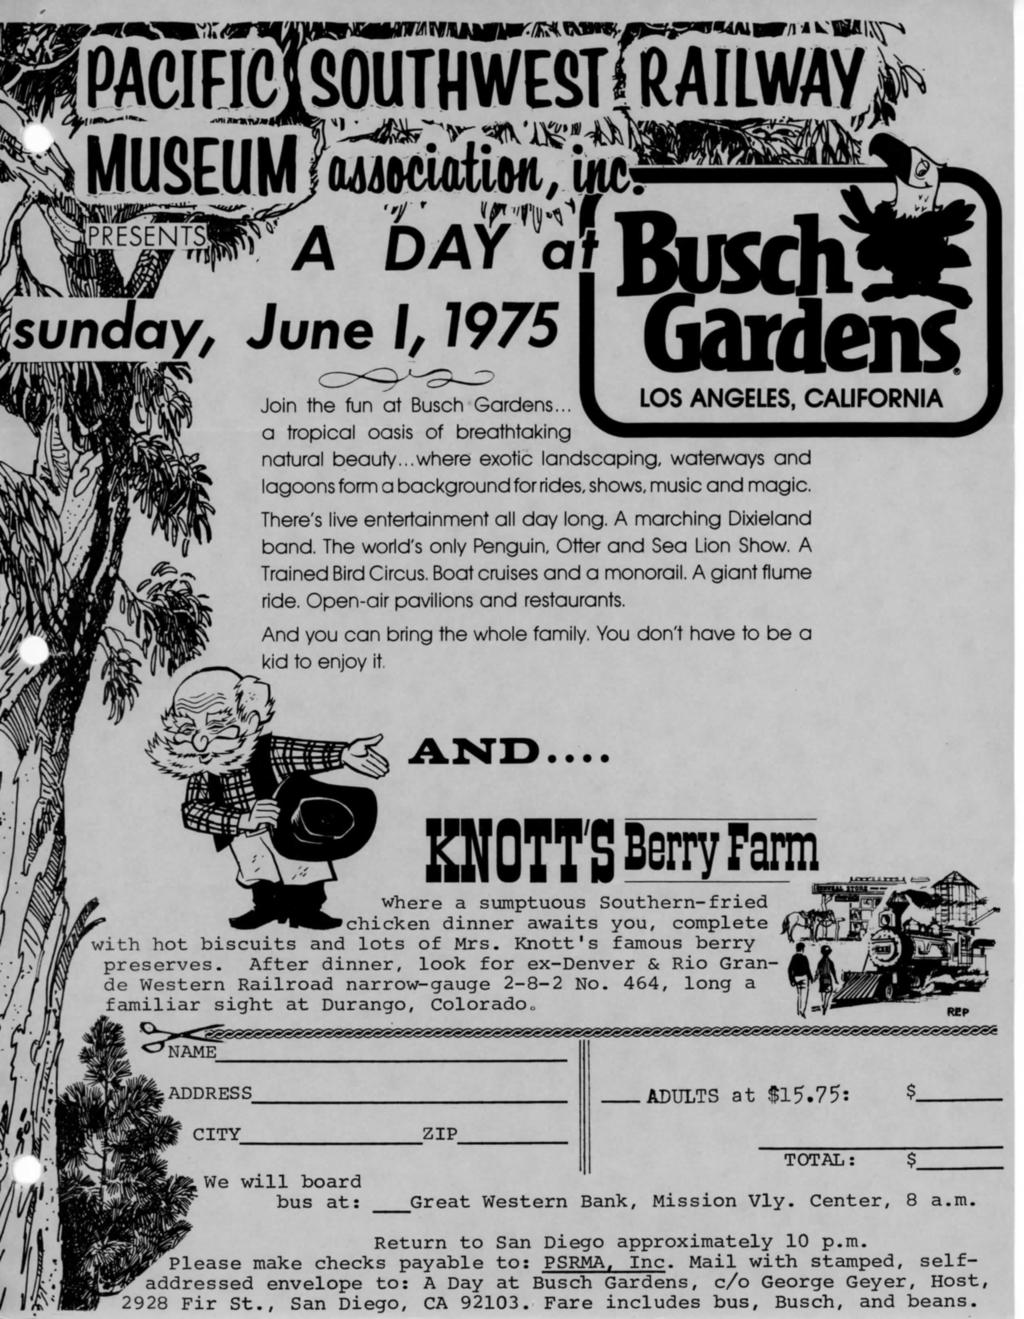 PACIFJCSOUTHW -.w.«'/'' Sunday, June I, 7975 m ^-"fh1! m A DAY av Join the fun at Busch Gardens... LOS ANGELES, CALIFORNIA a tropical oasis of breathtaking natural beauty.